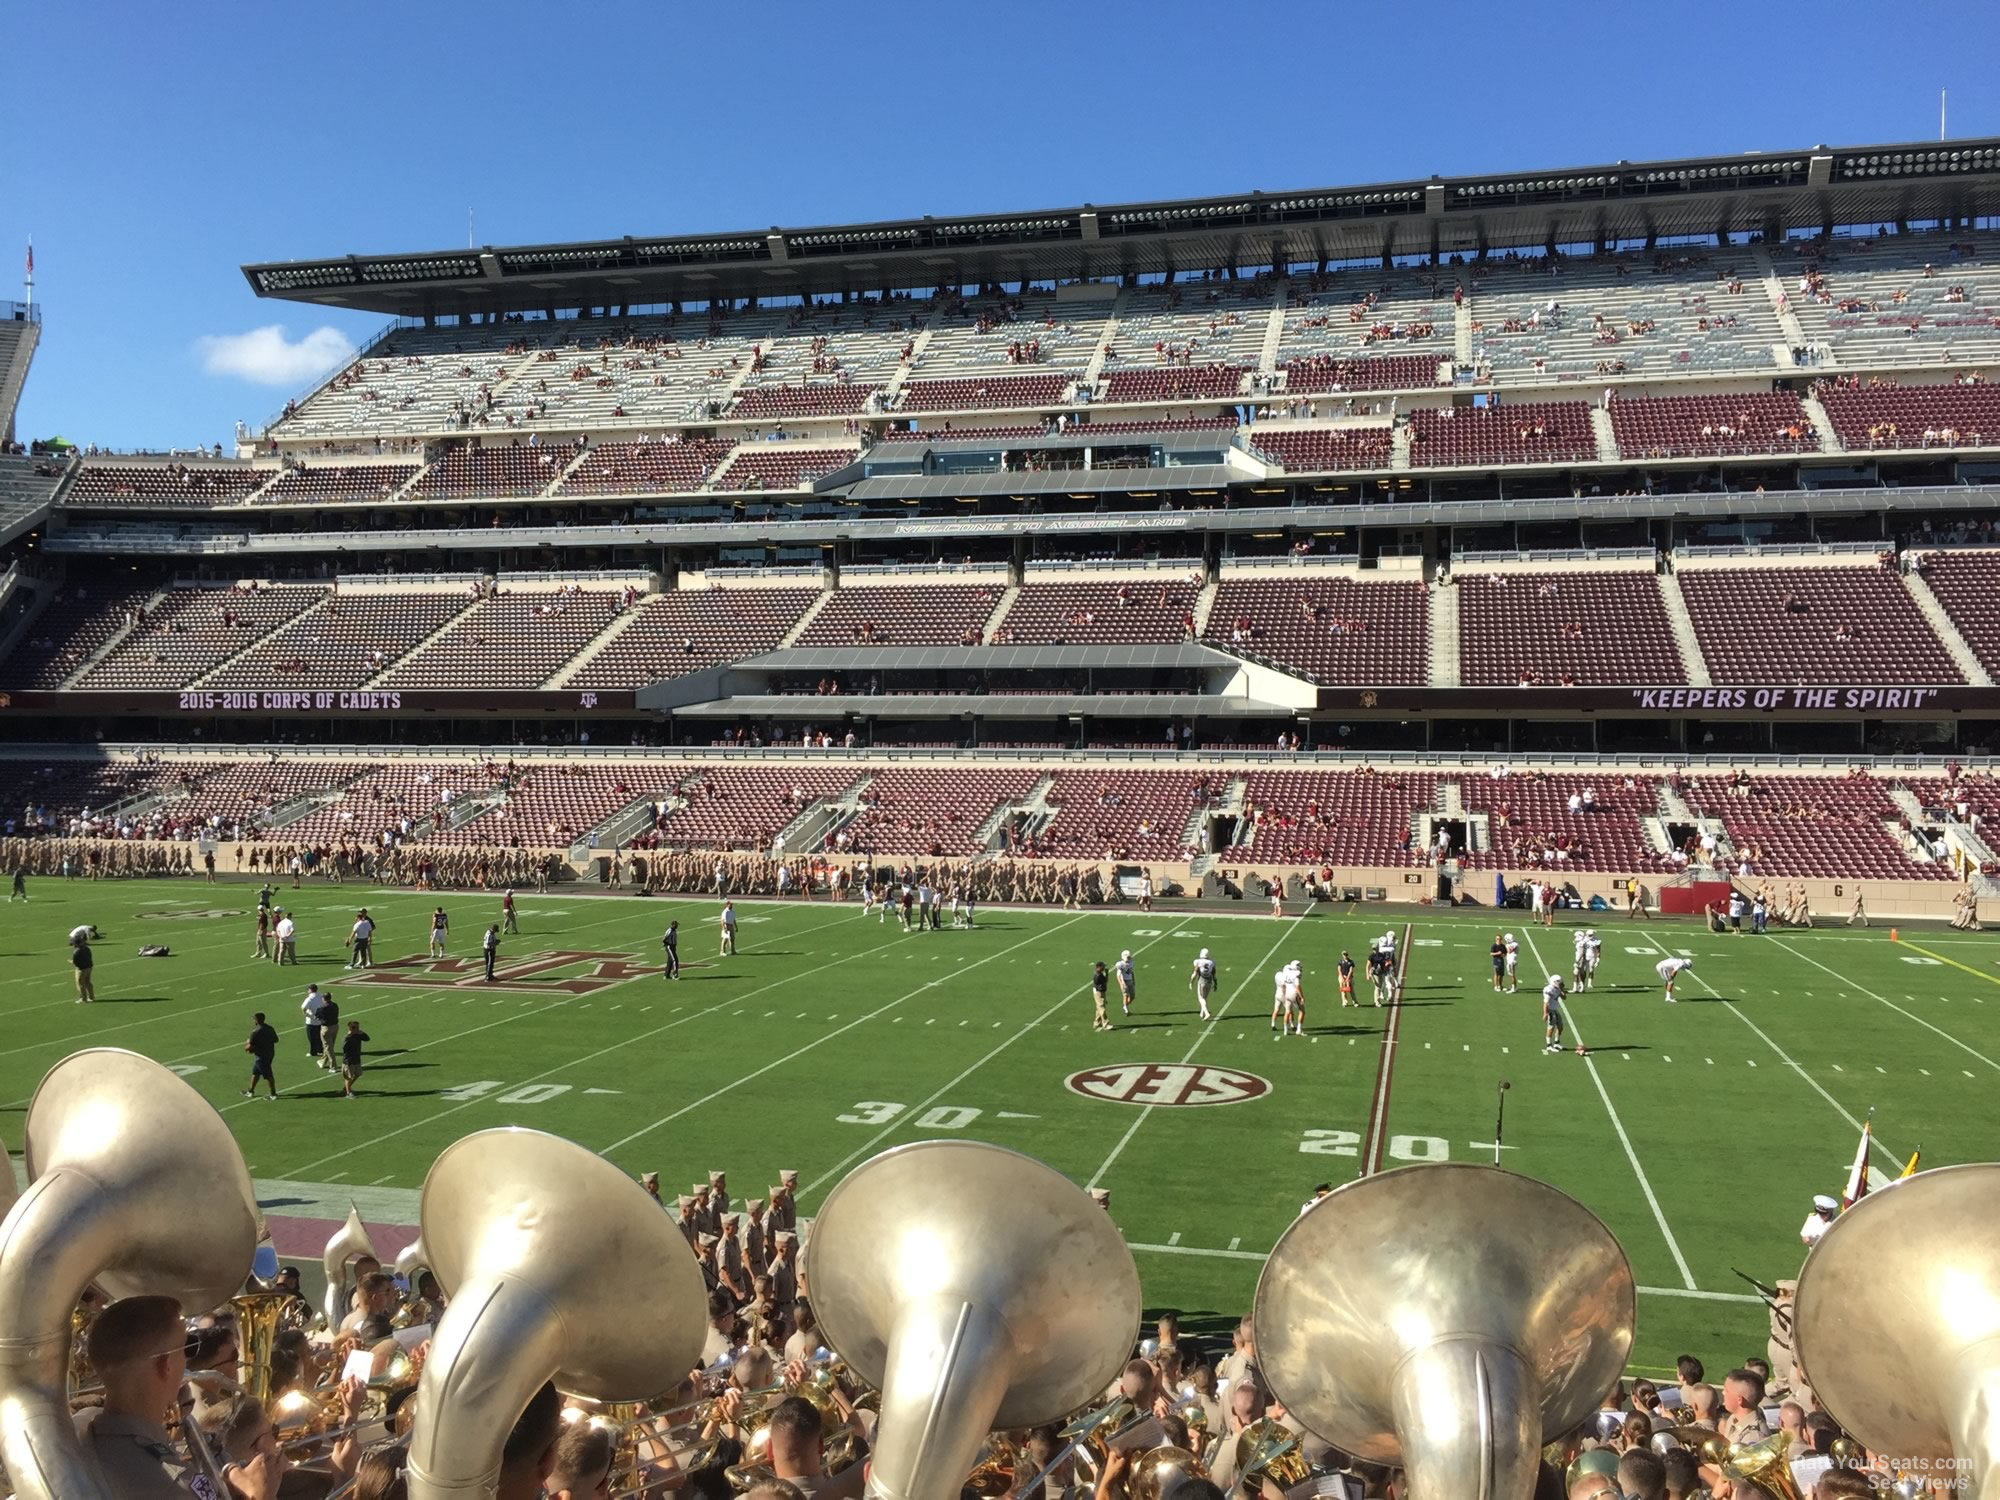 section 124, row 20 seat view  - kyle field